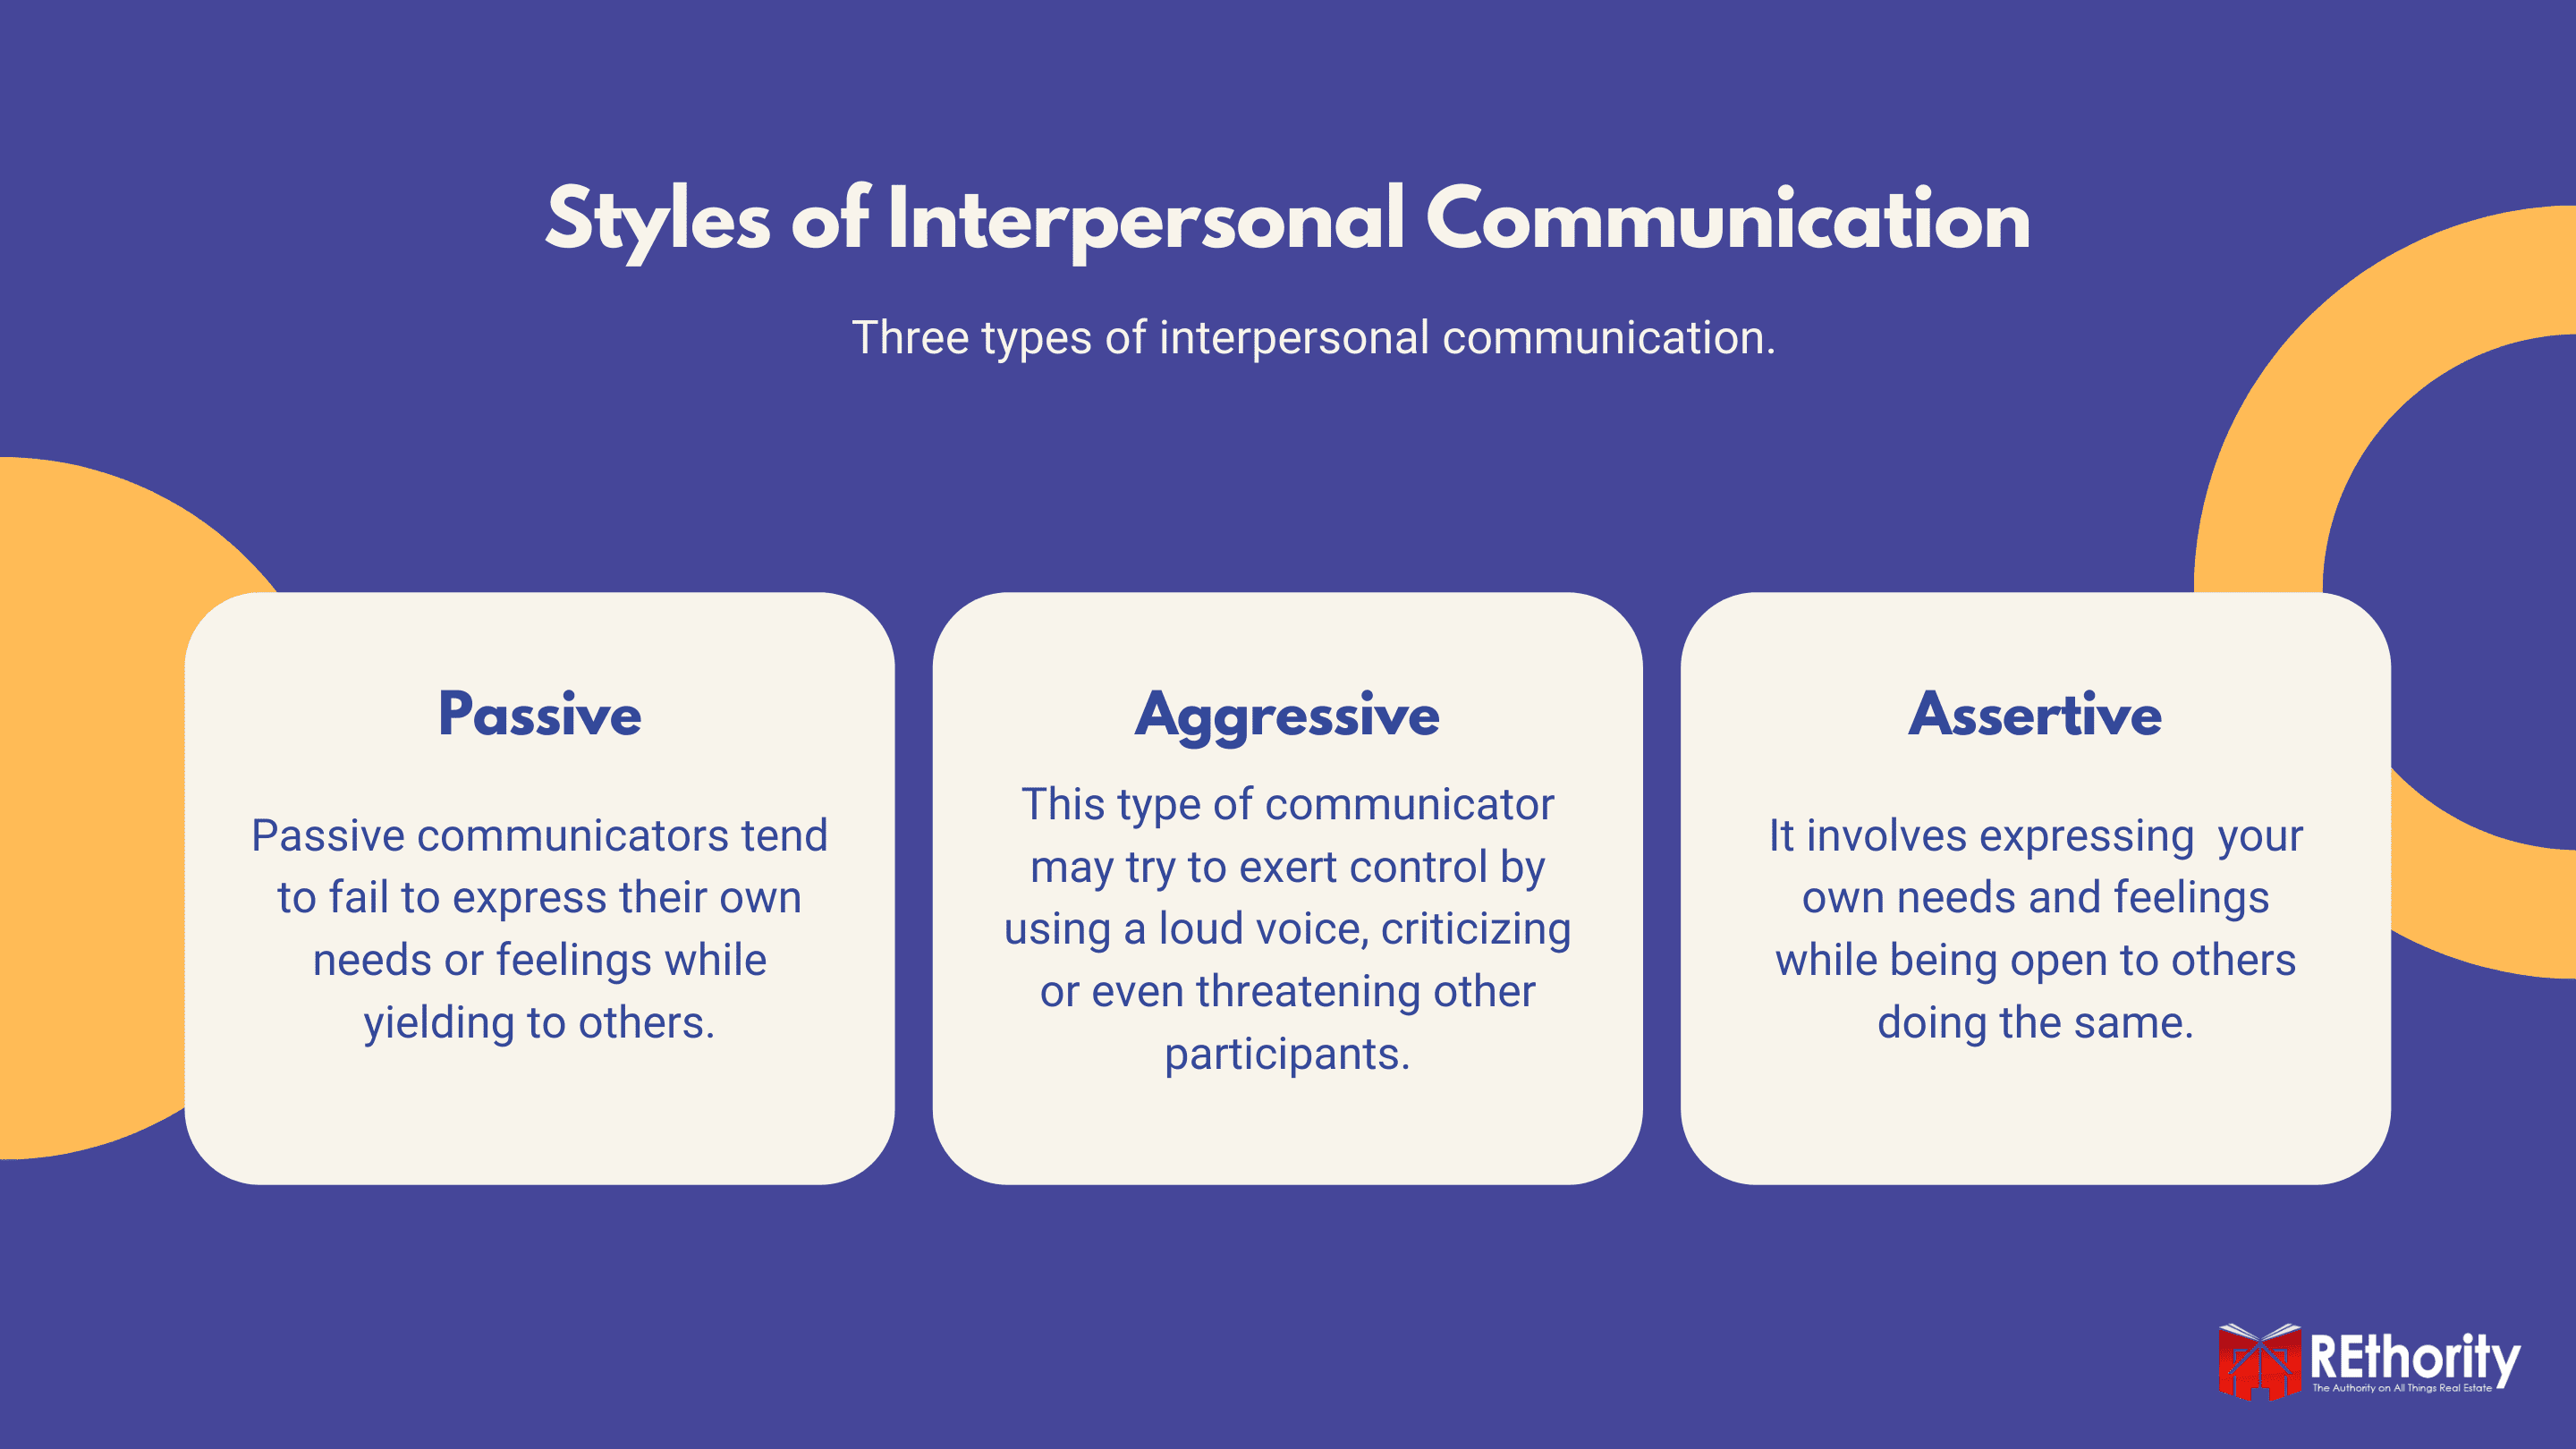 Styles of Interpersonal Communication graphic